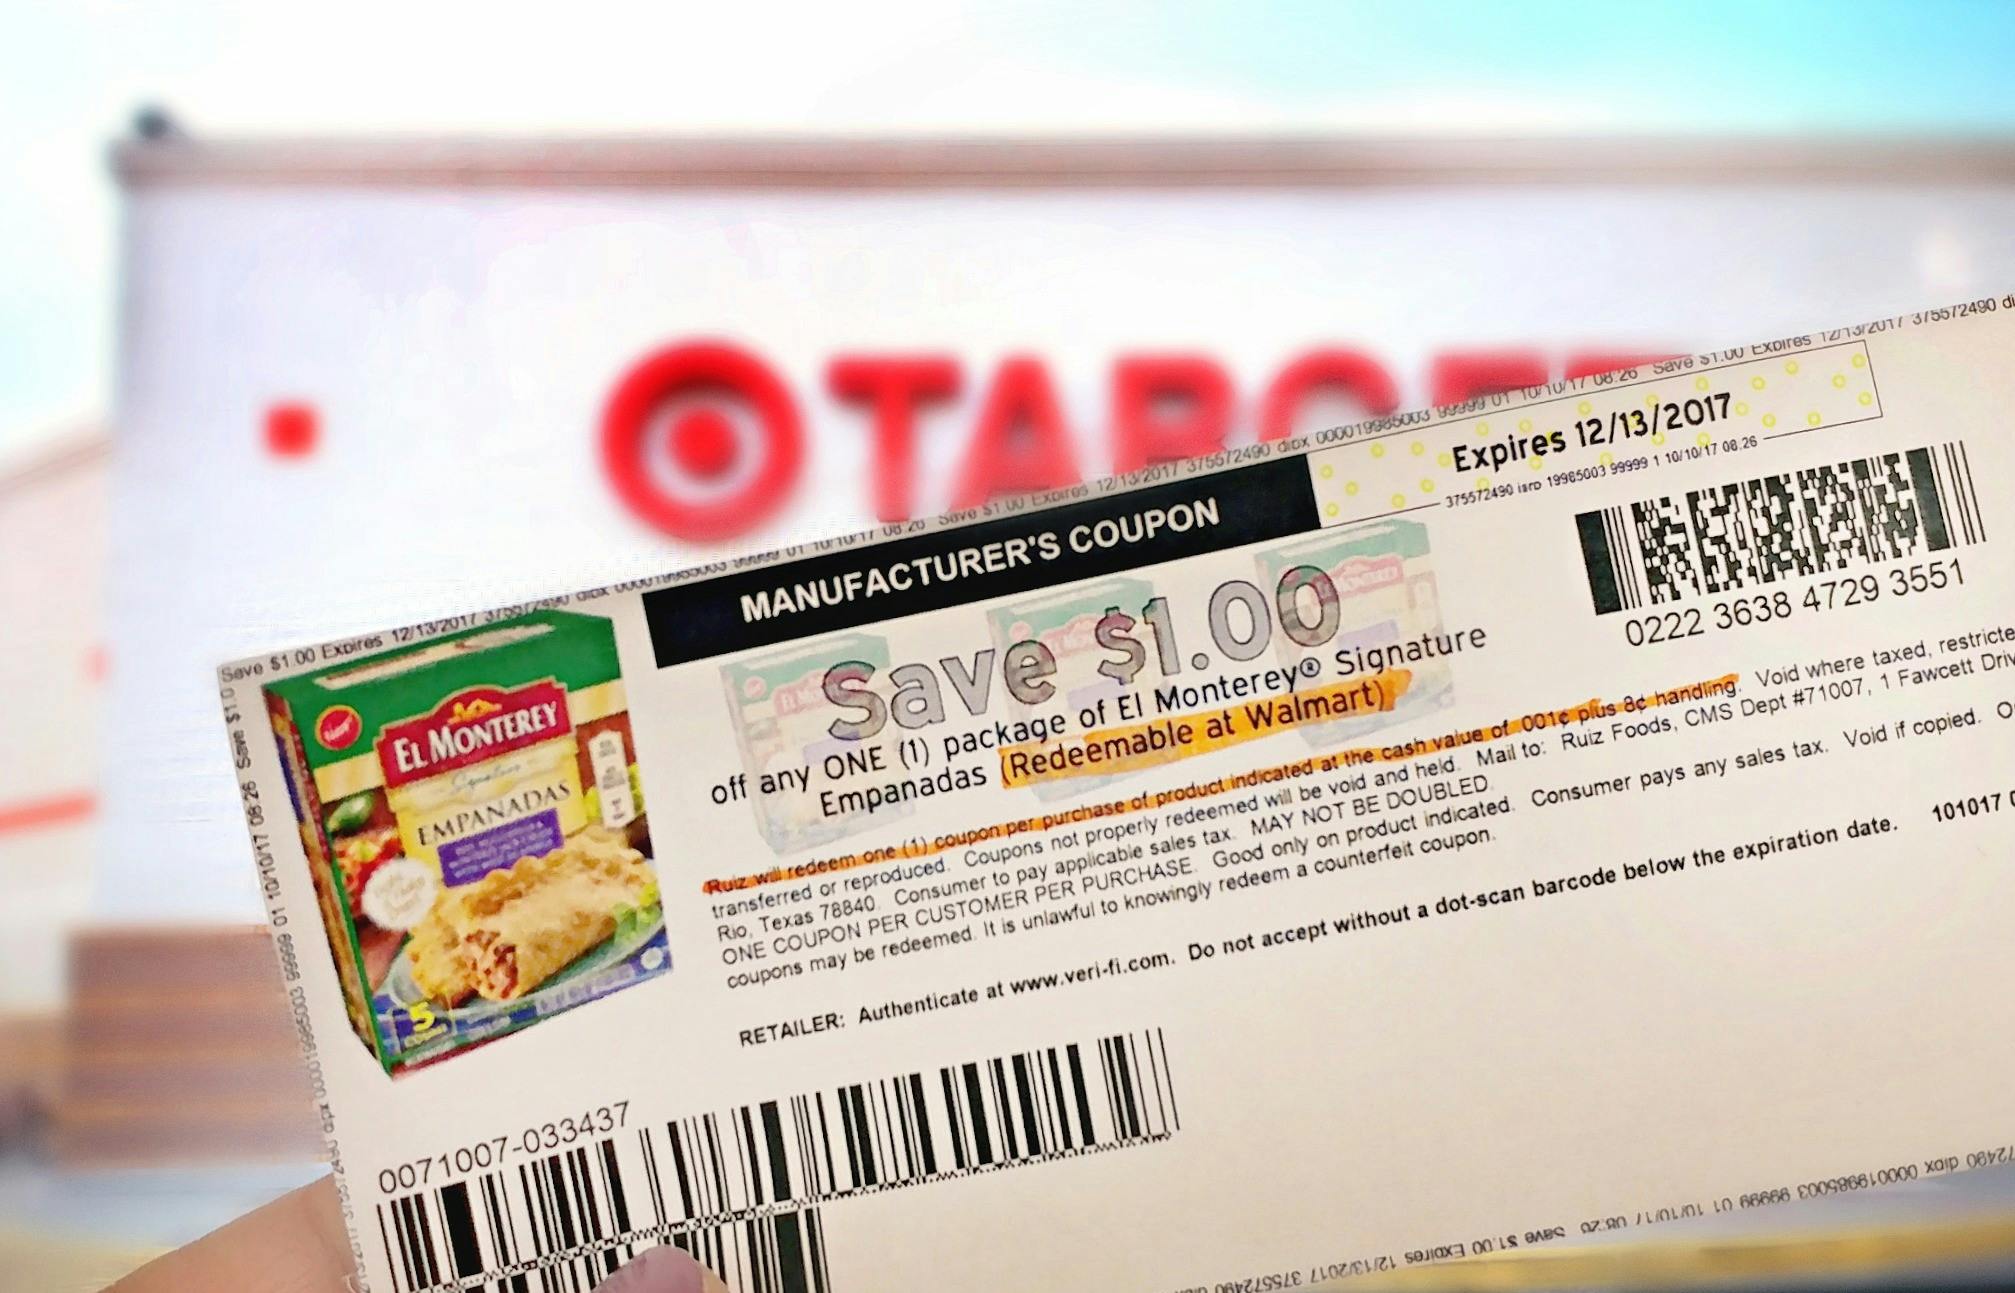 16-couponing-mistakes-you-re-making-at-target-the-krazy-coupon-lady